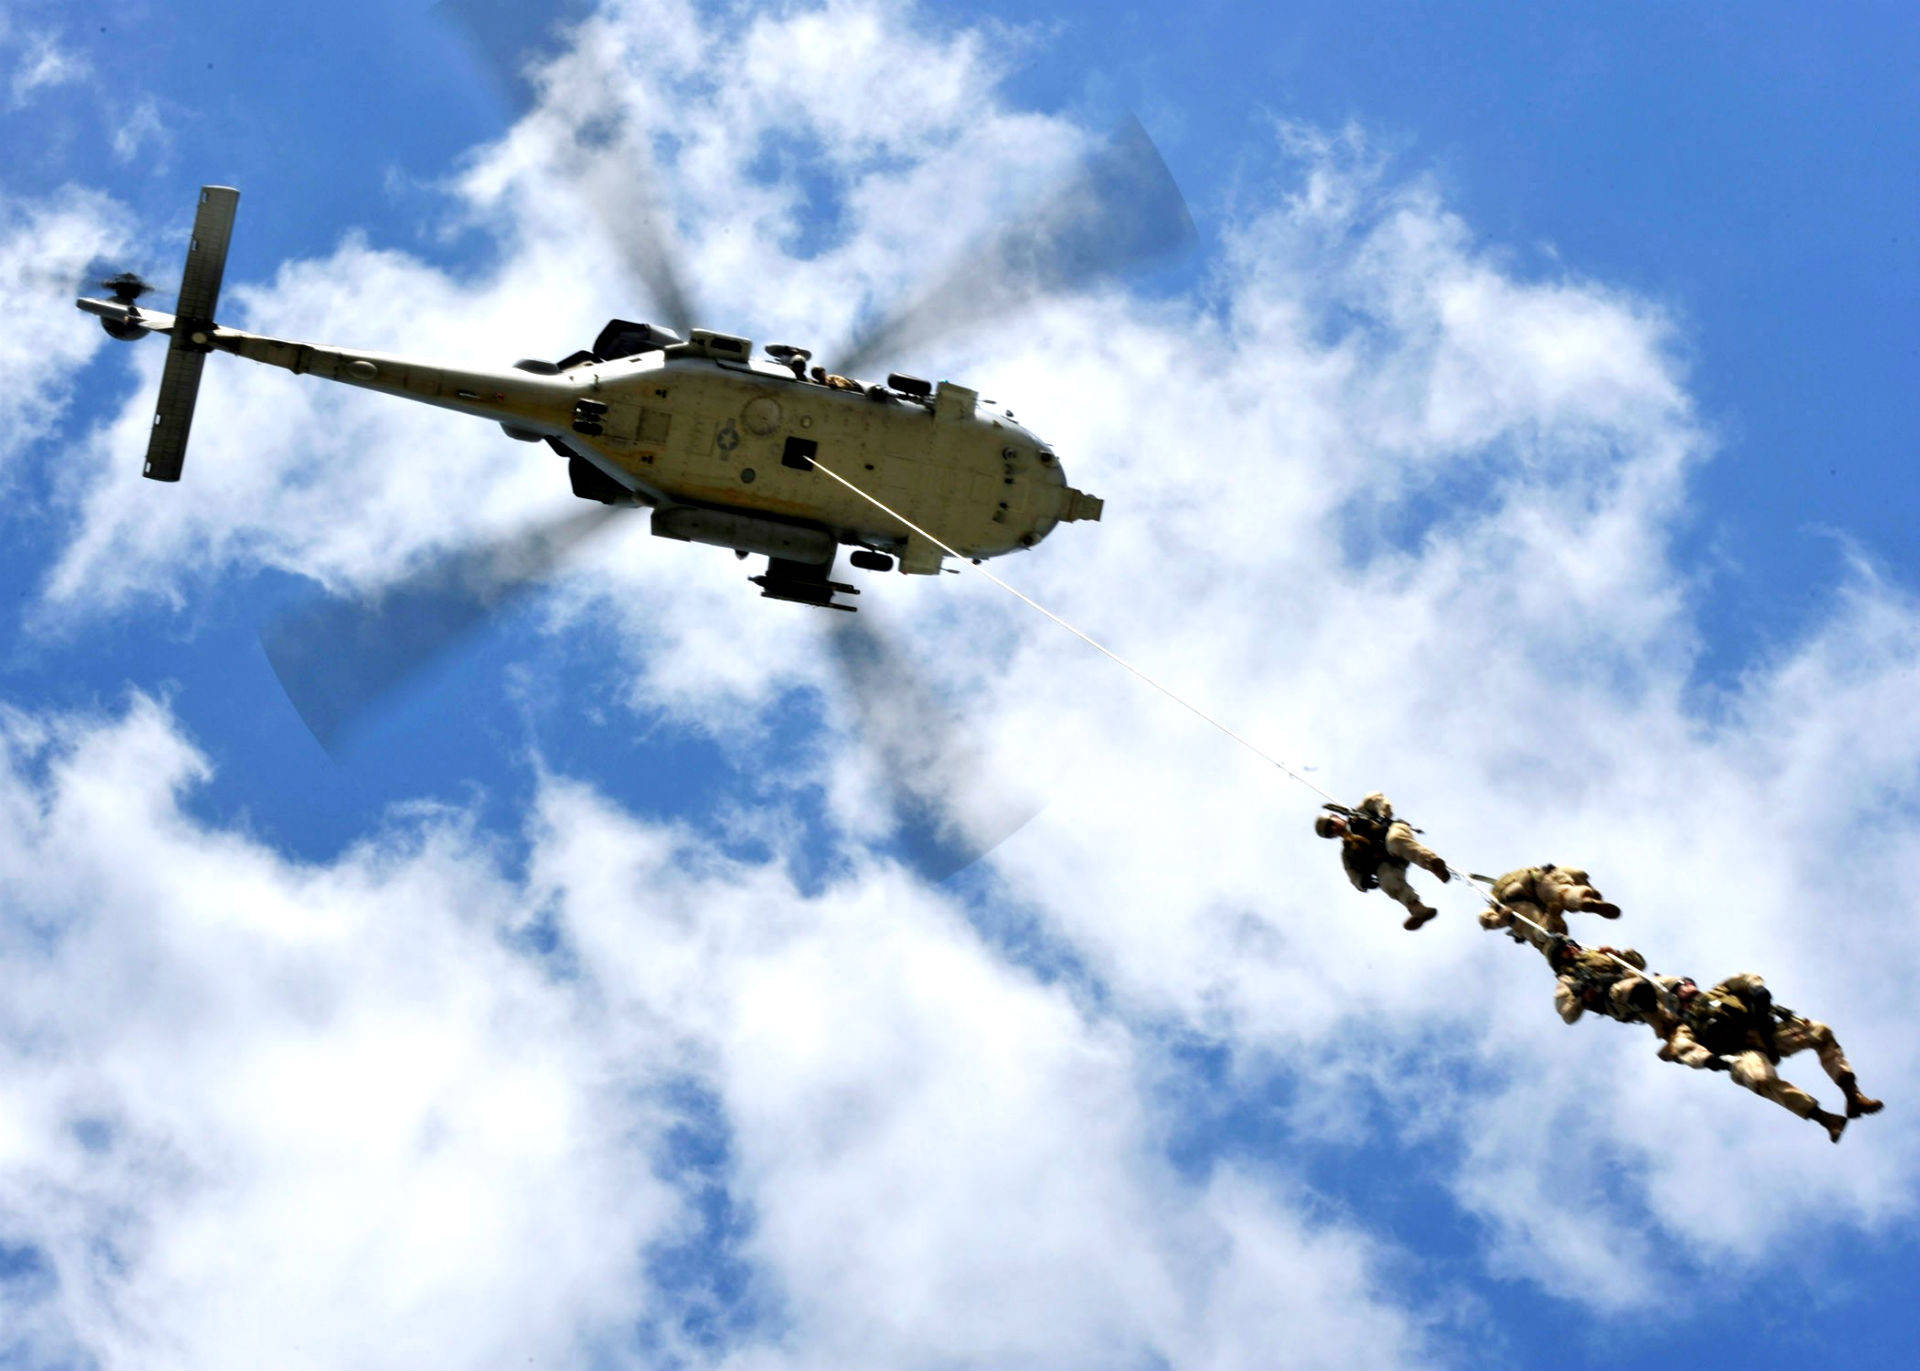 U S Navy Soldiers Dropping Off A Helicopter